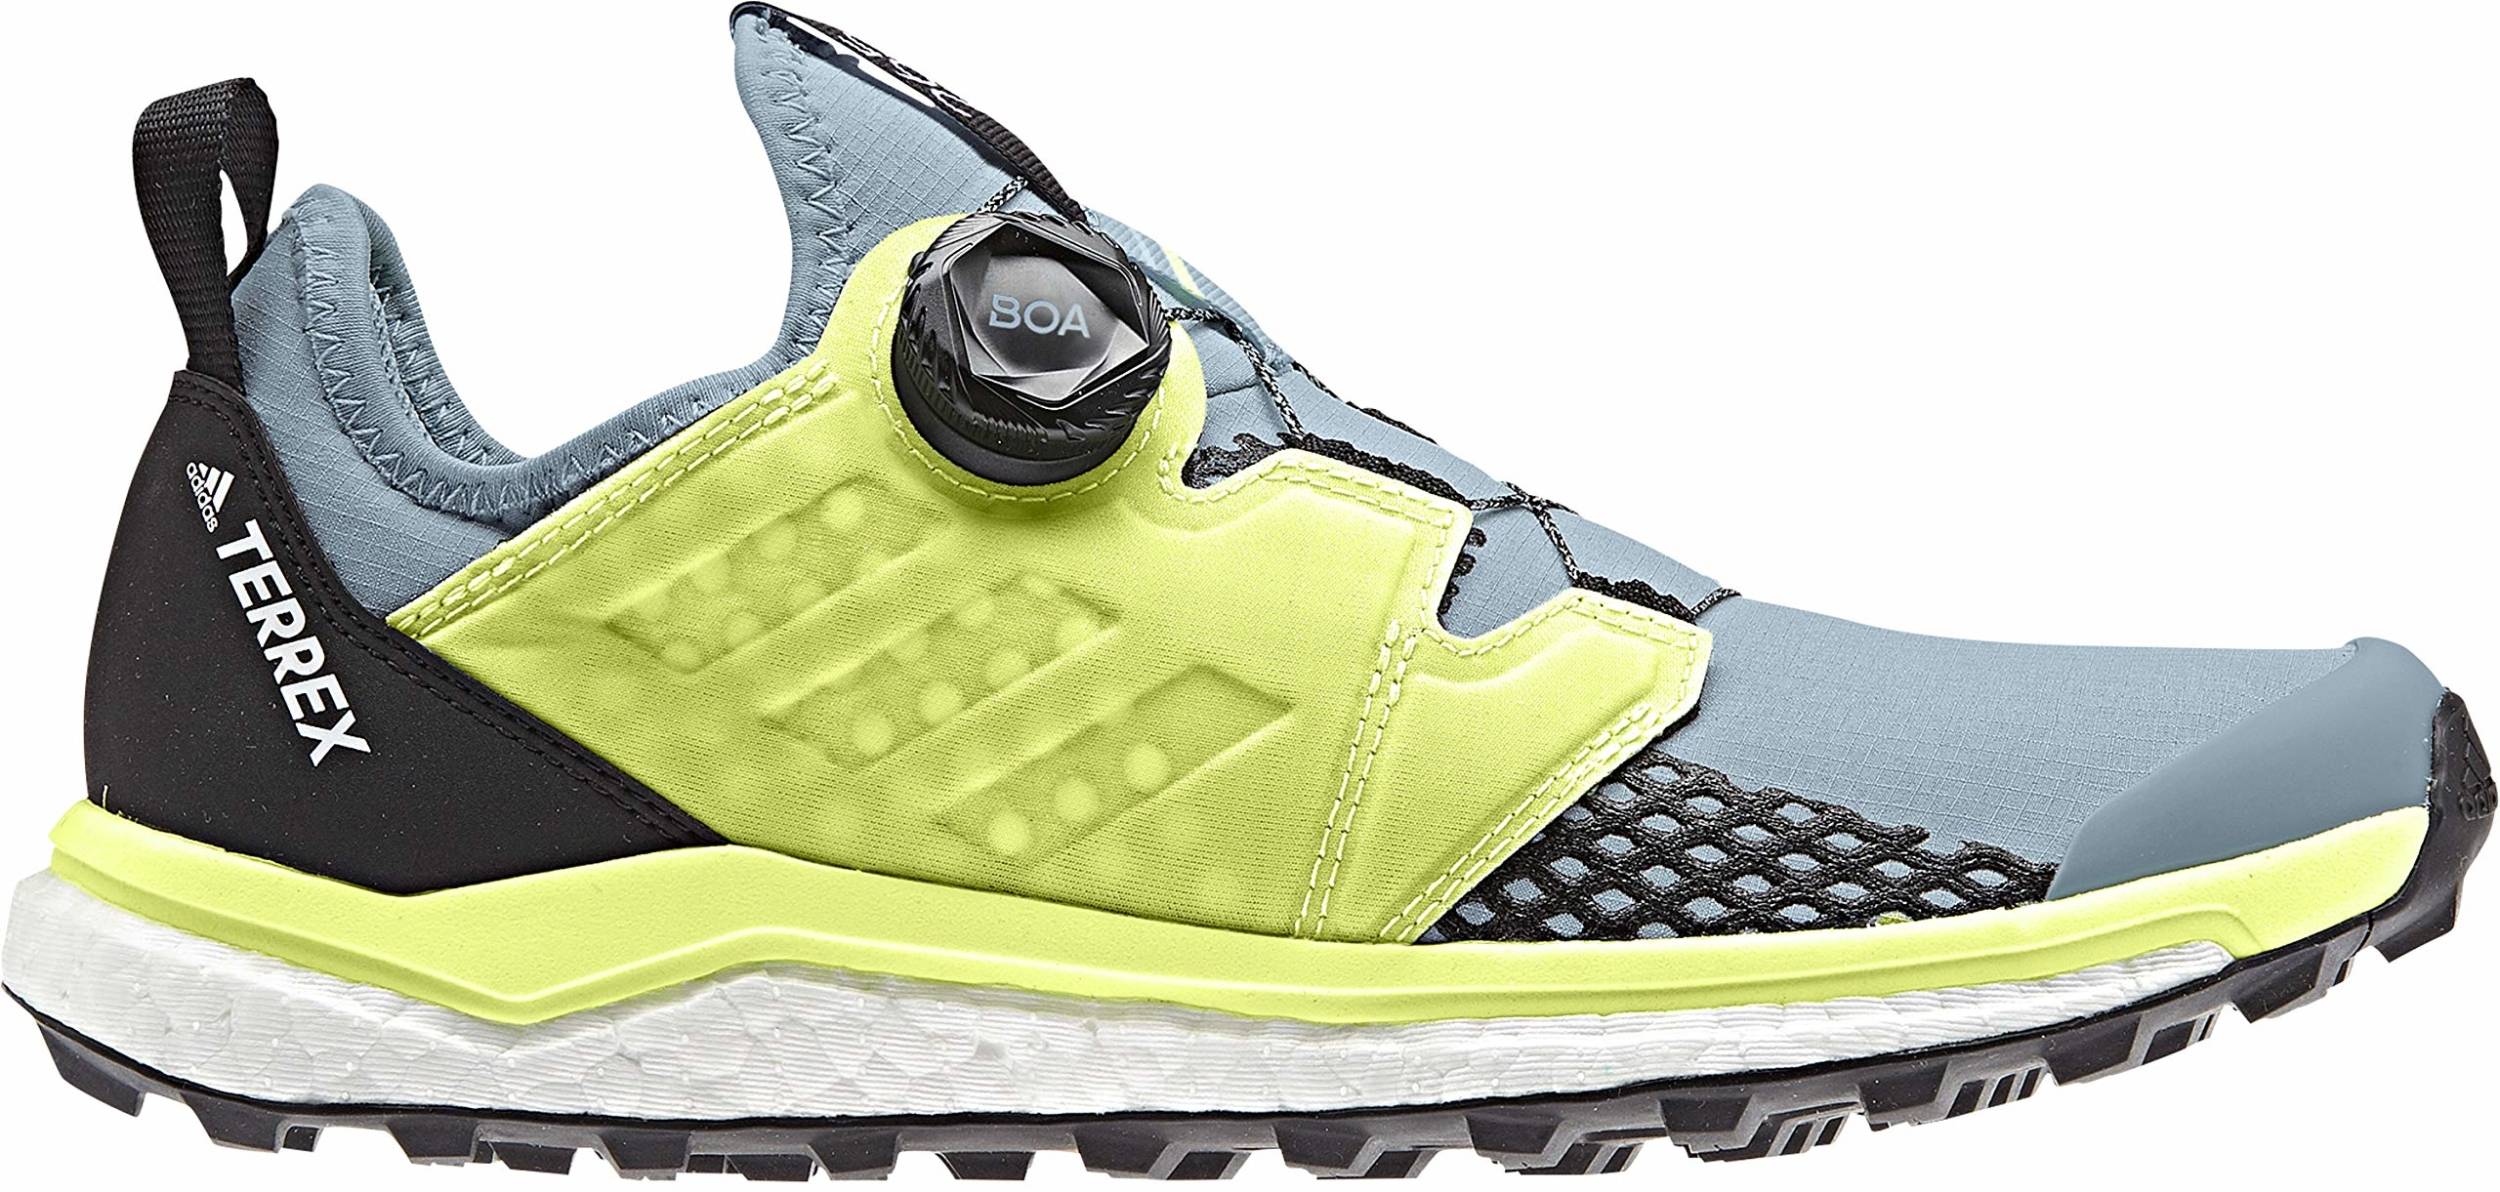 Save 24% on BOA Running Shoes (14 